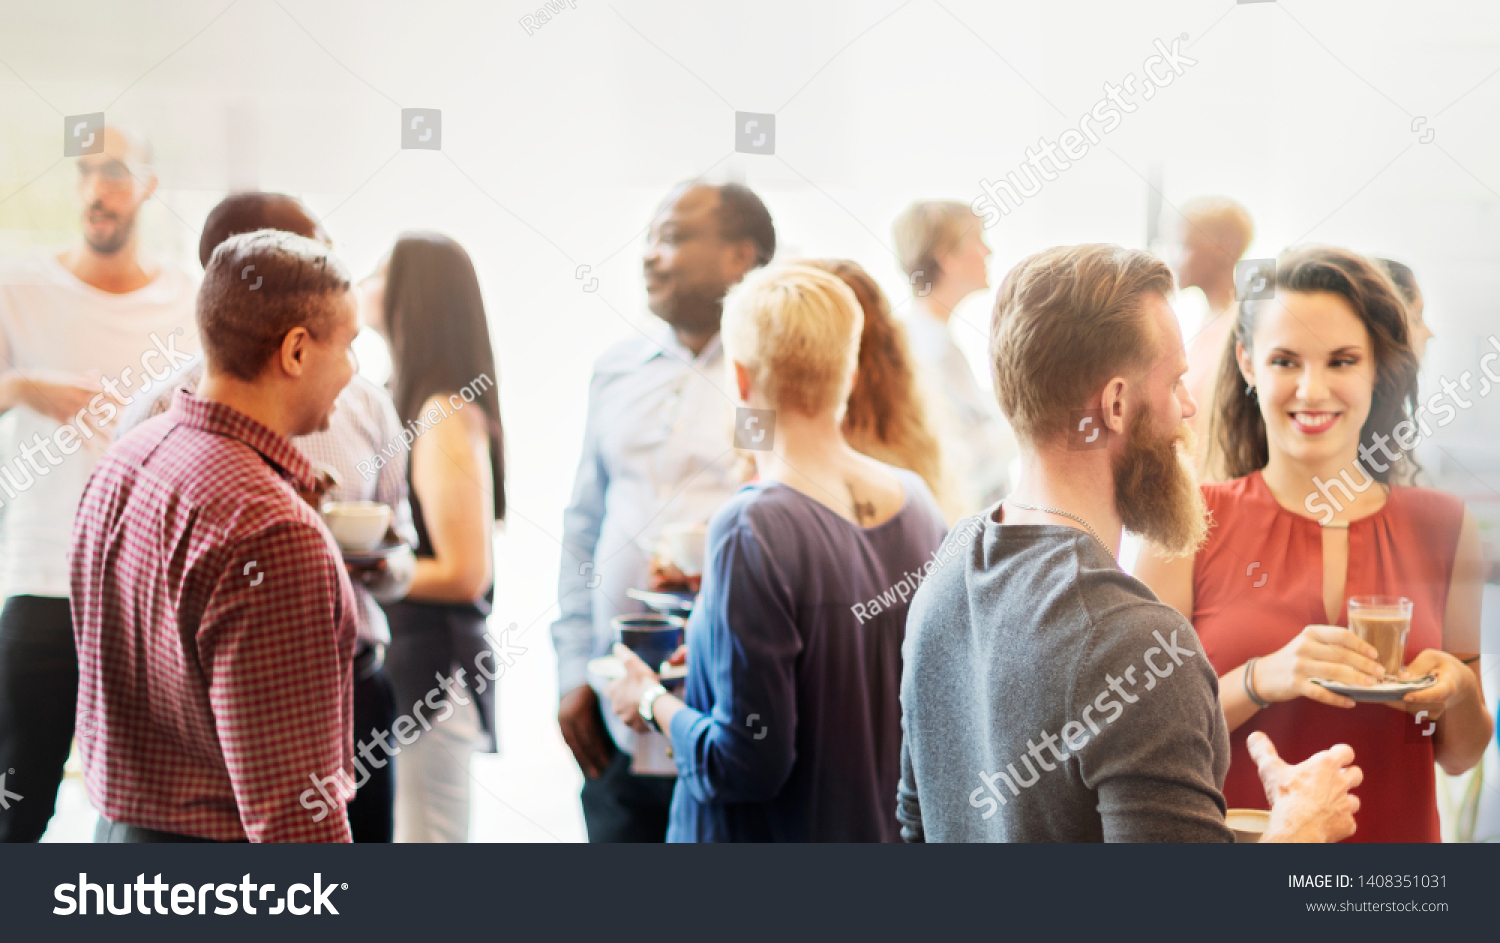 Diverse people at the office party #1408351031